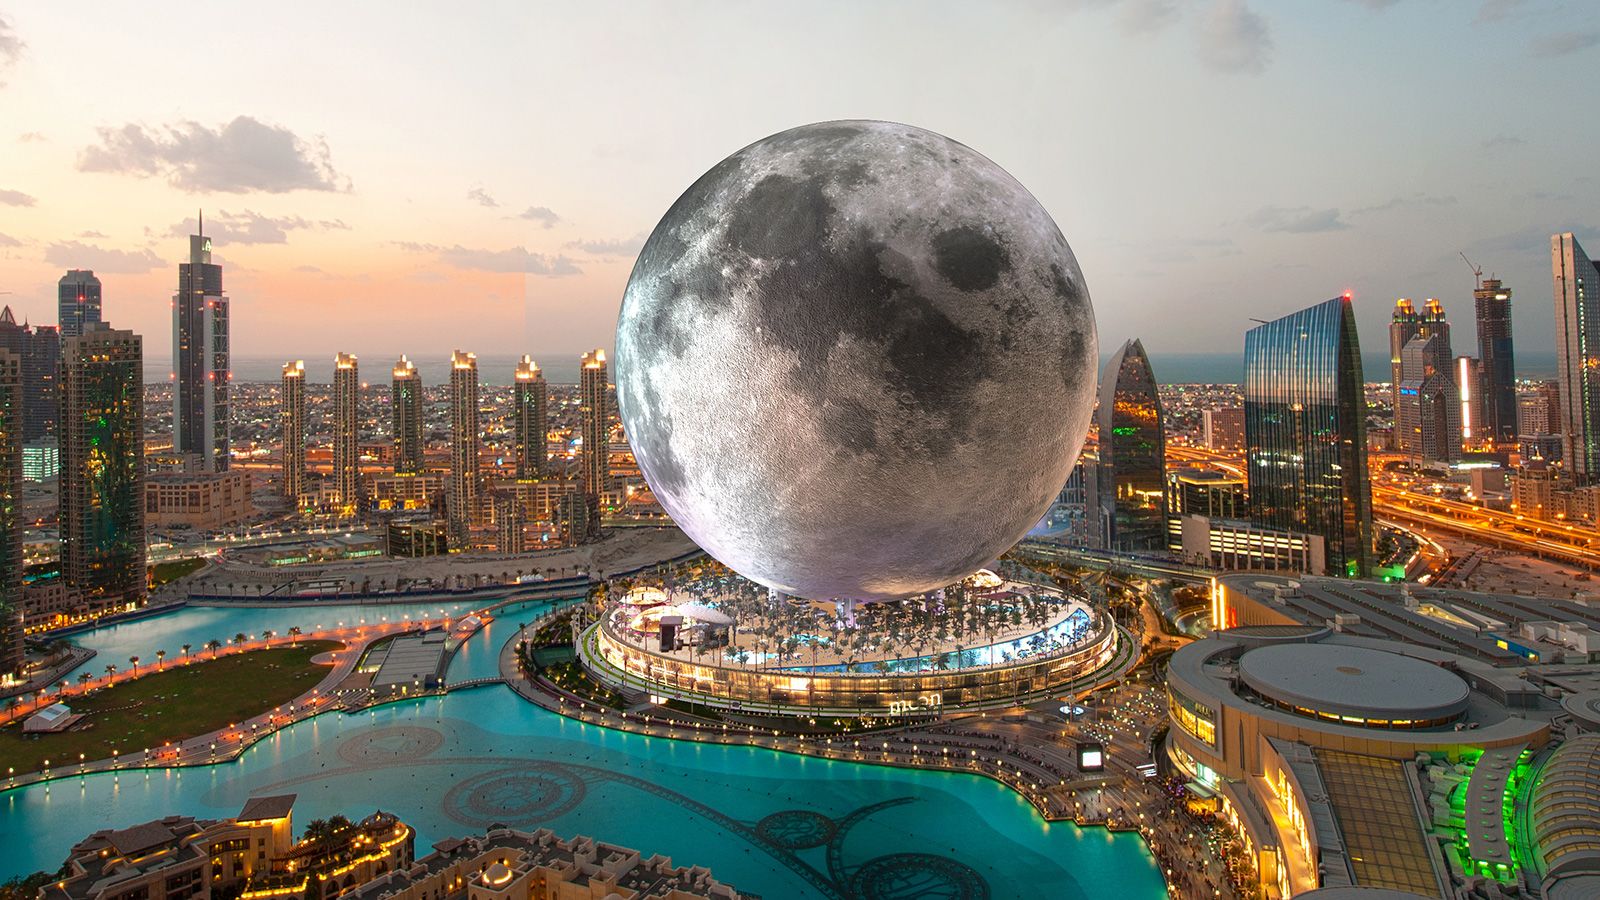 The gigantic moon hotel that could be built in Dubai | CNN